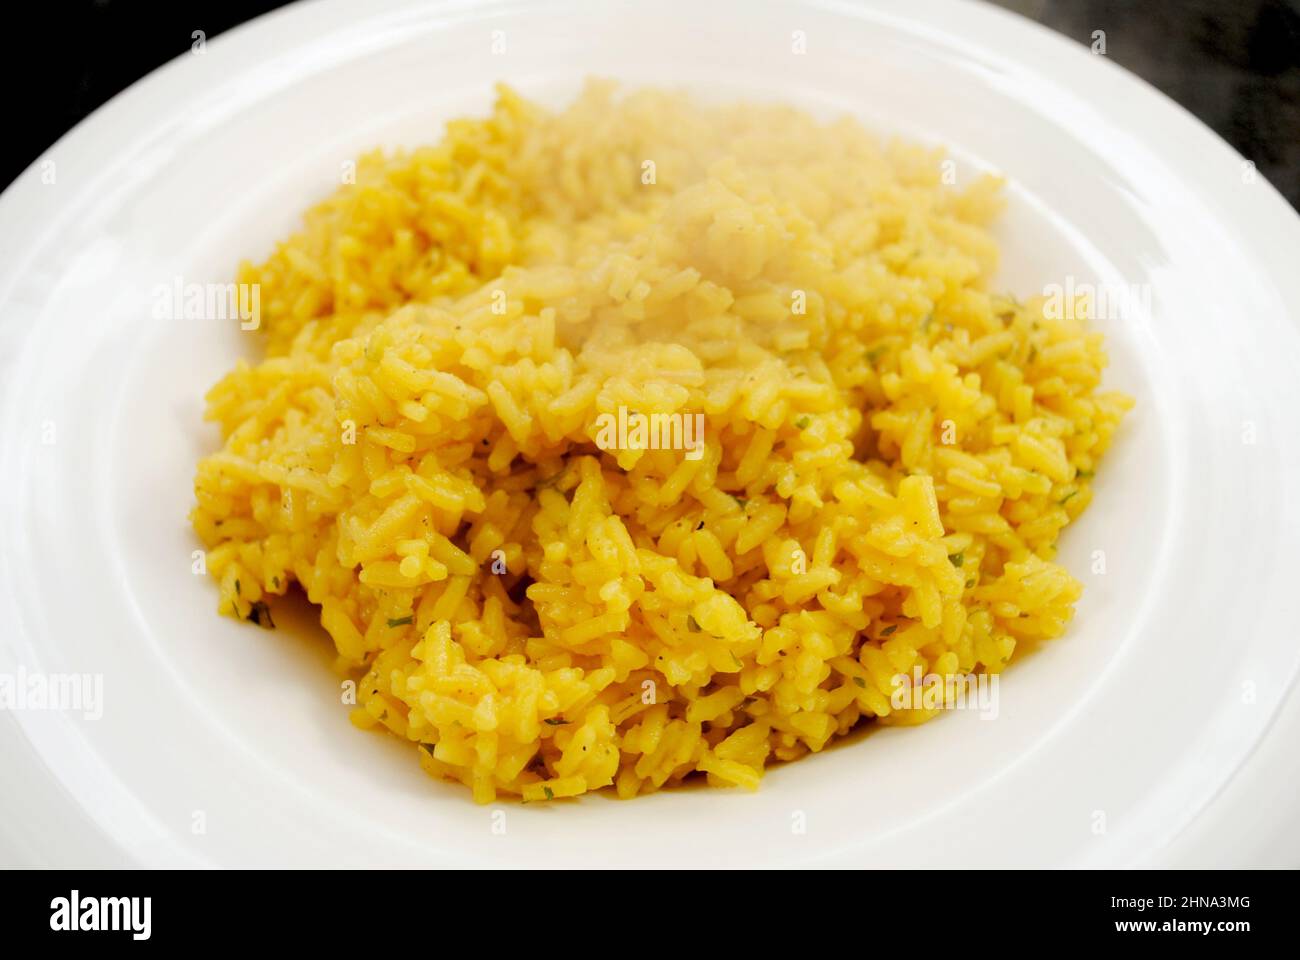 Side Dish of Steaming Herb and Yellow Rice Stock Photo